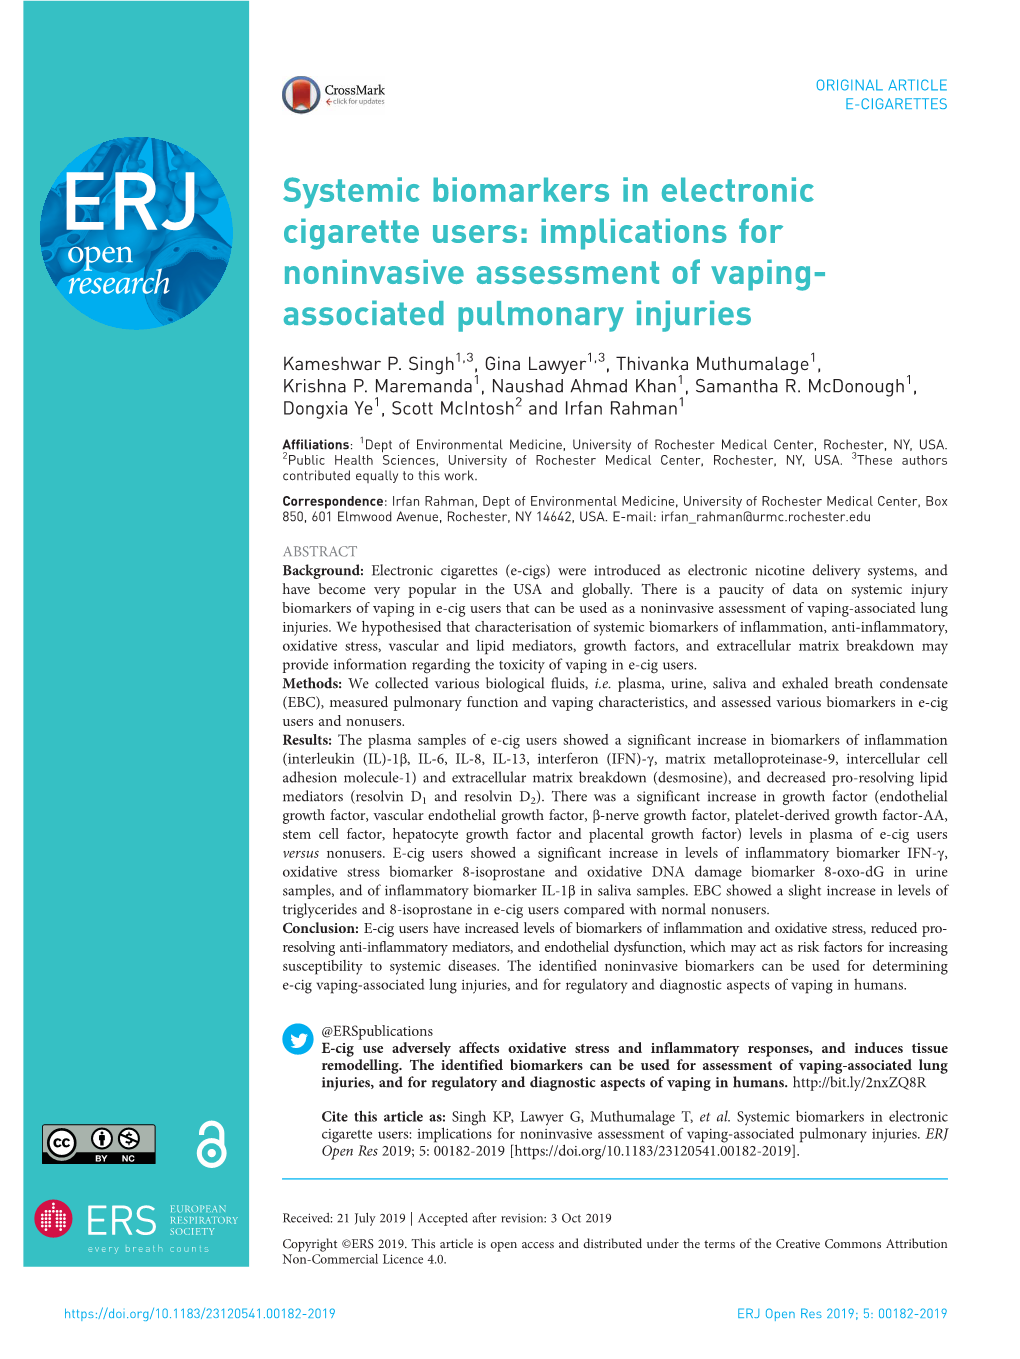 Systemic Biomarkers in Electronic Cigarette Users: Implications for Noninvasive Assessment of Vaping-Associated Pulmonary Injuries